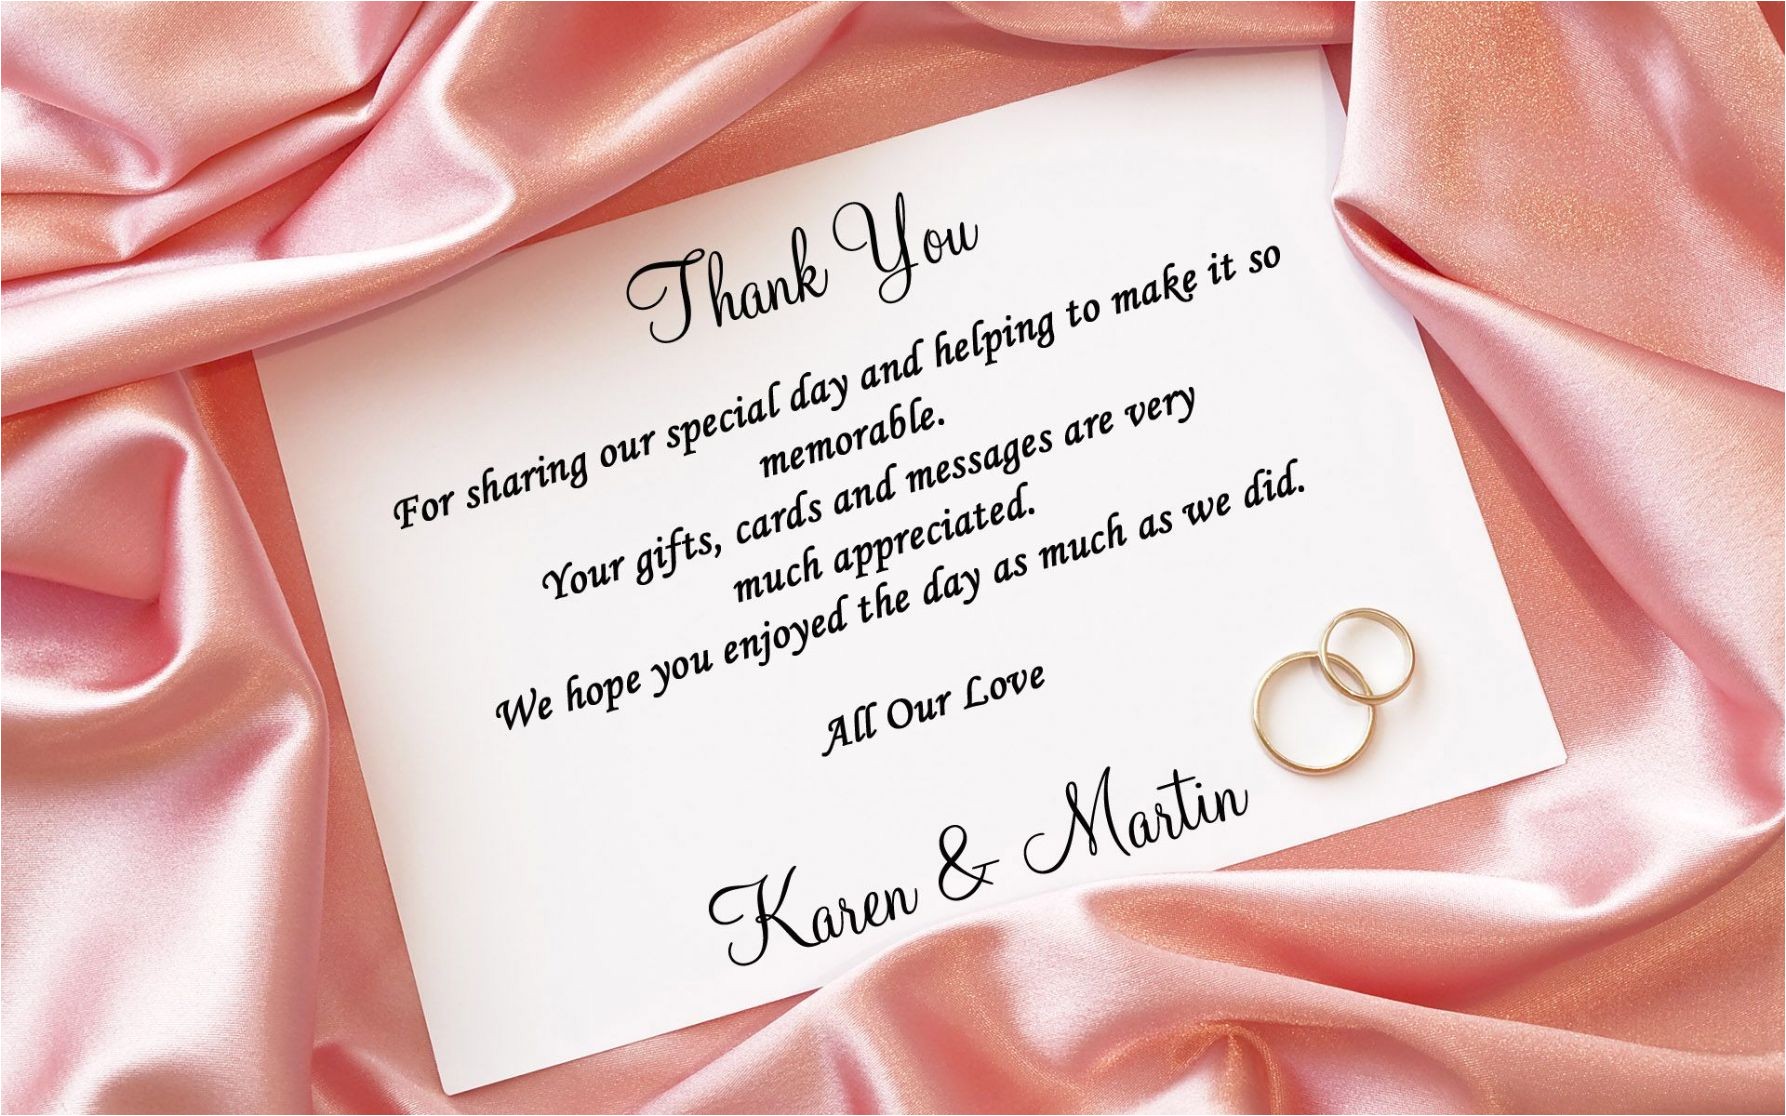 thank you cards are just as important as your wedding invitation